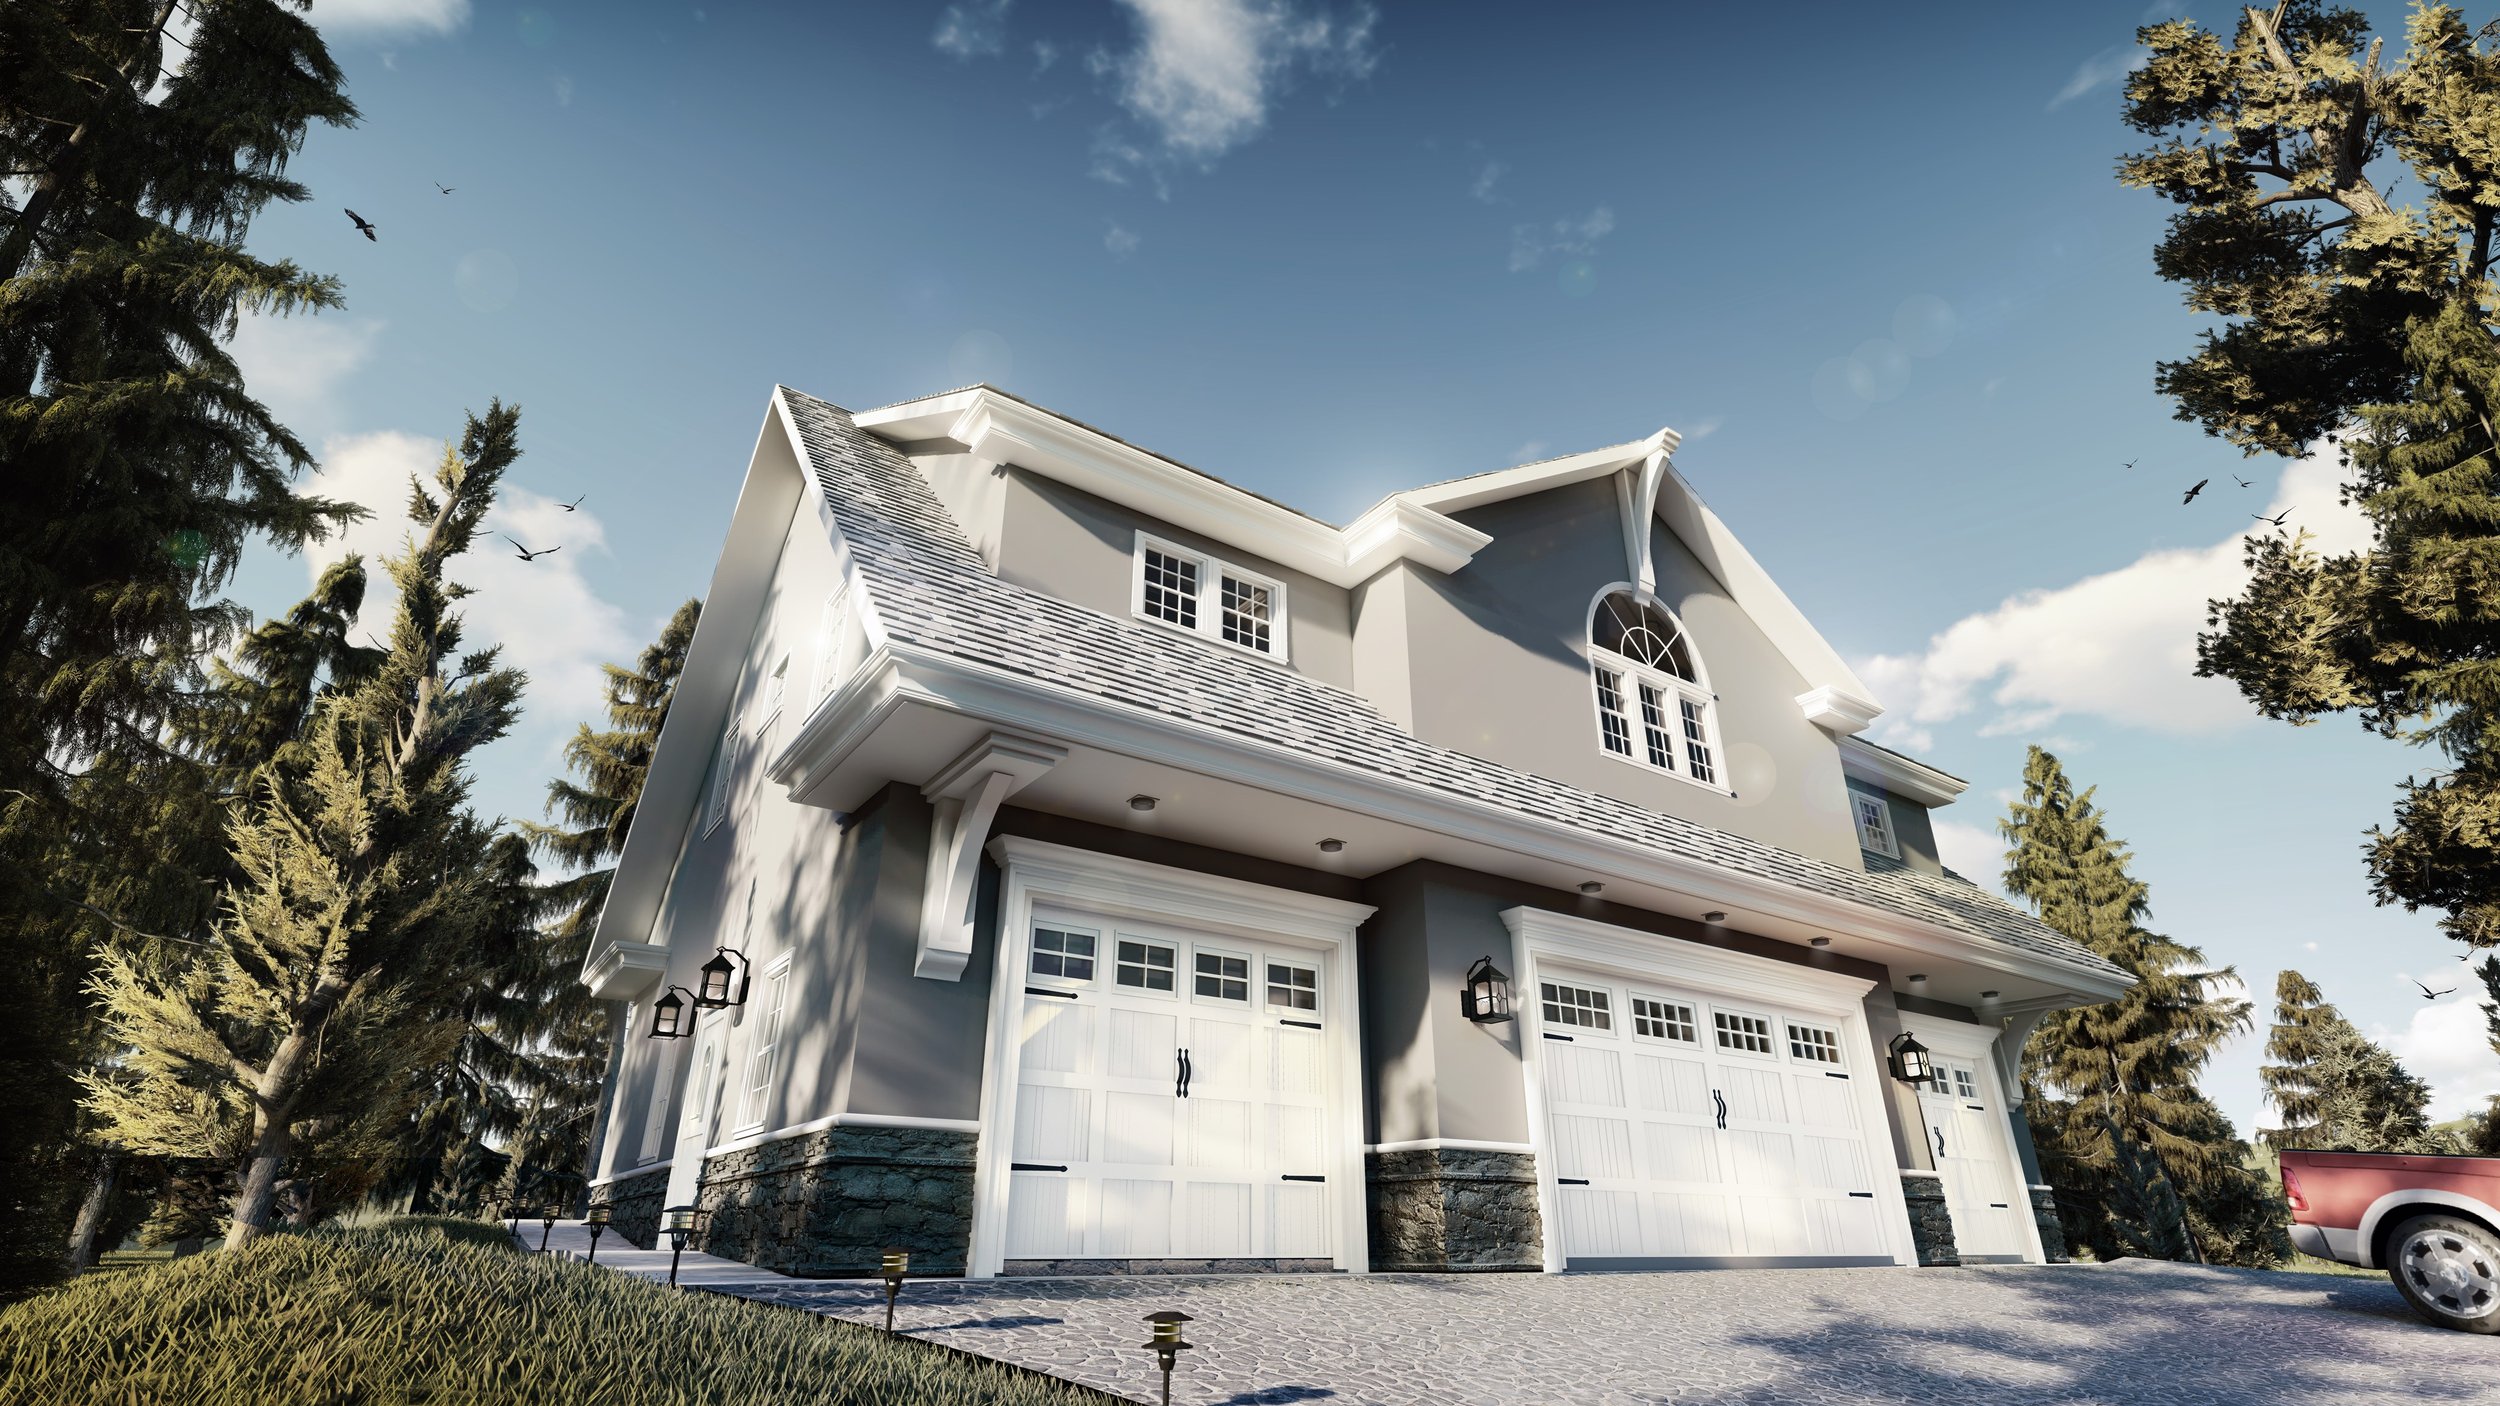  Conceptual rendering of the New Hampshire Carriage House project. 